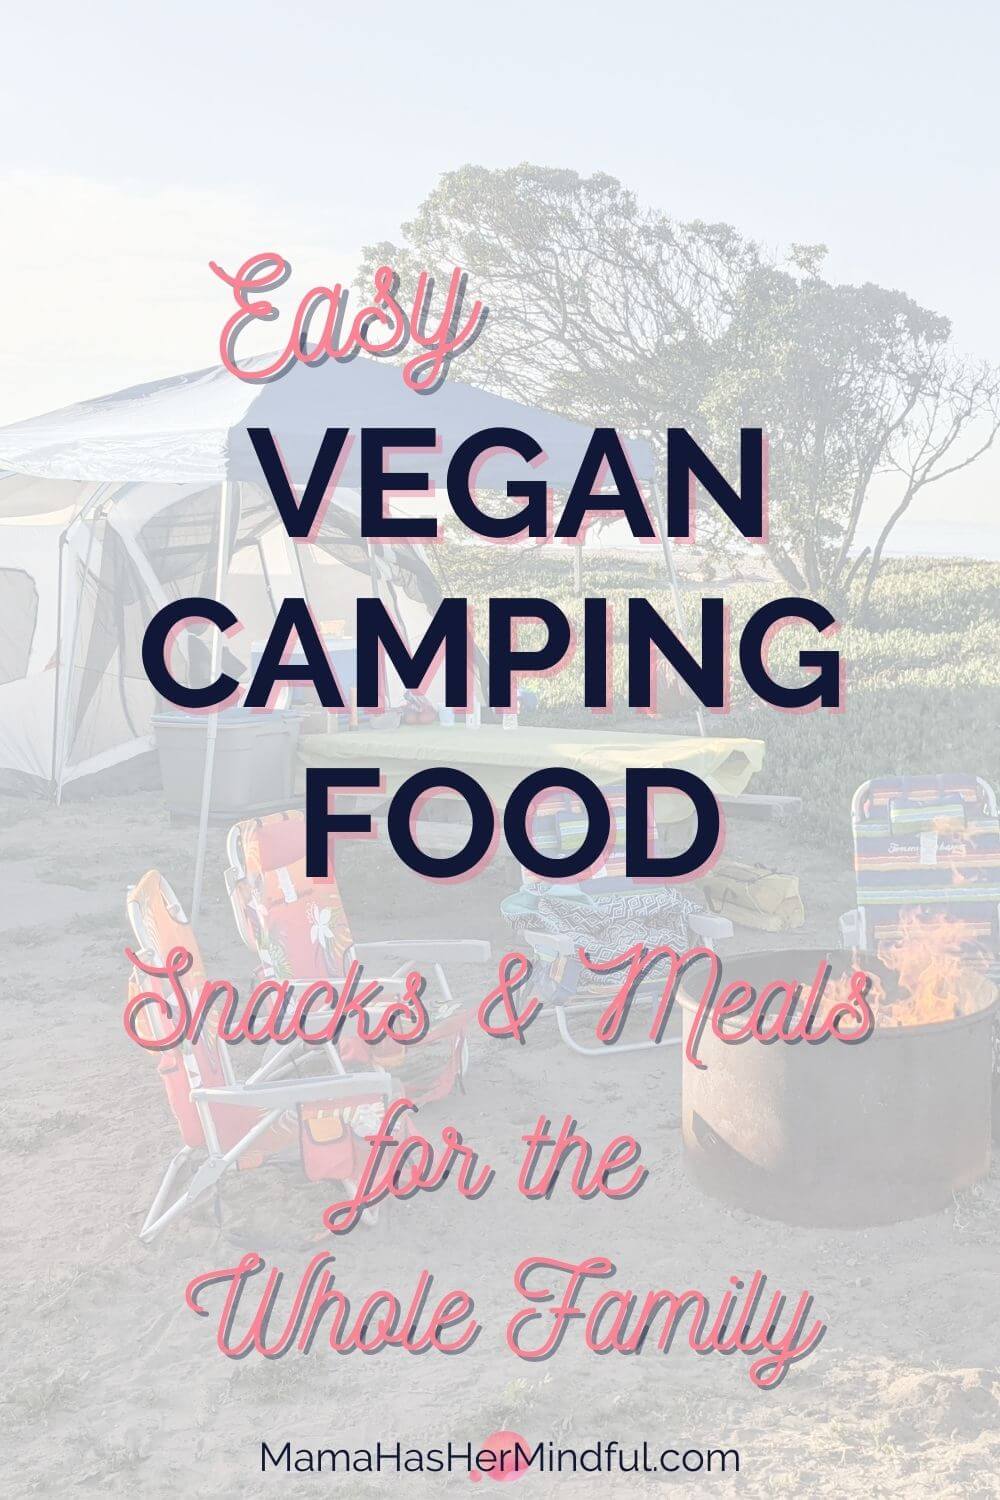 Easy Vegan Camping Food: Snacks and Meals for the Whole Family